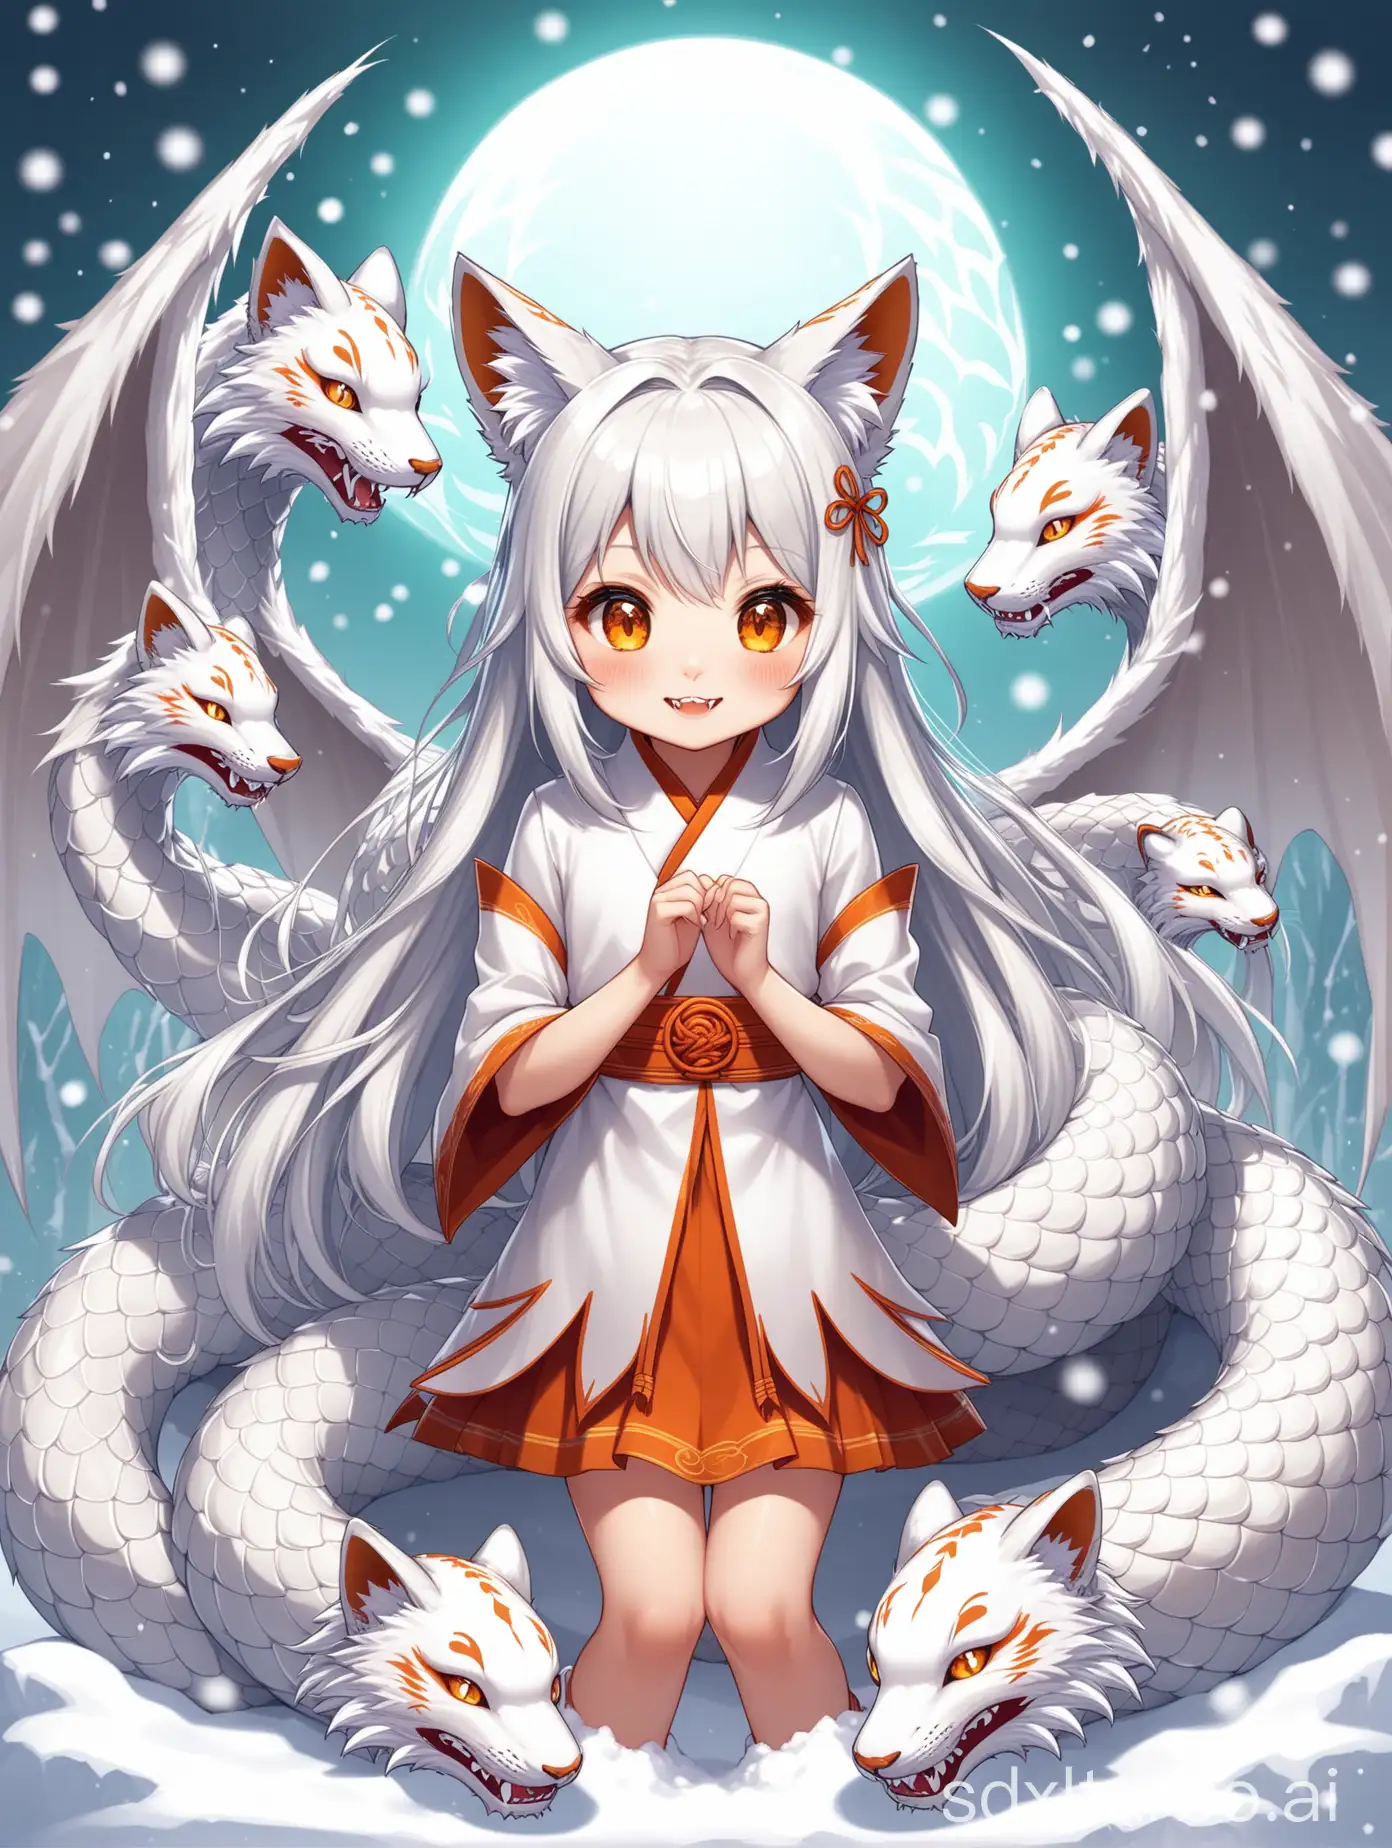 NineTailed-Fox-Girl-with-White-Tiger-Ears-and-Snow-Carving-Wings